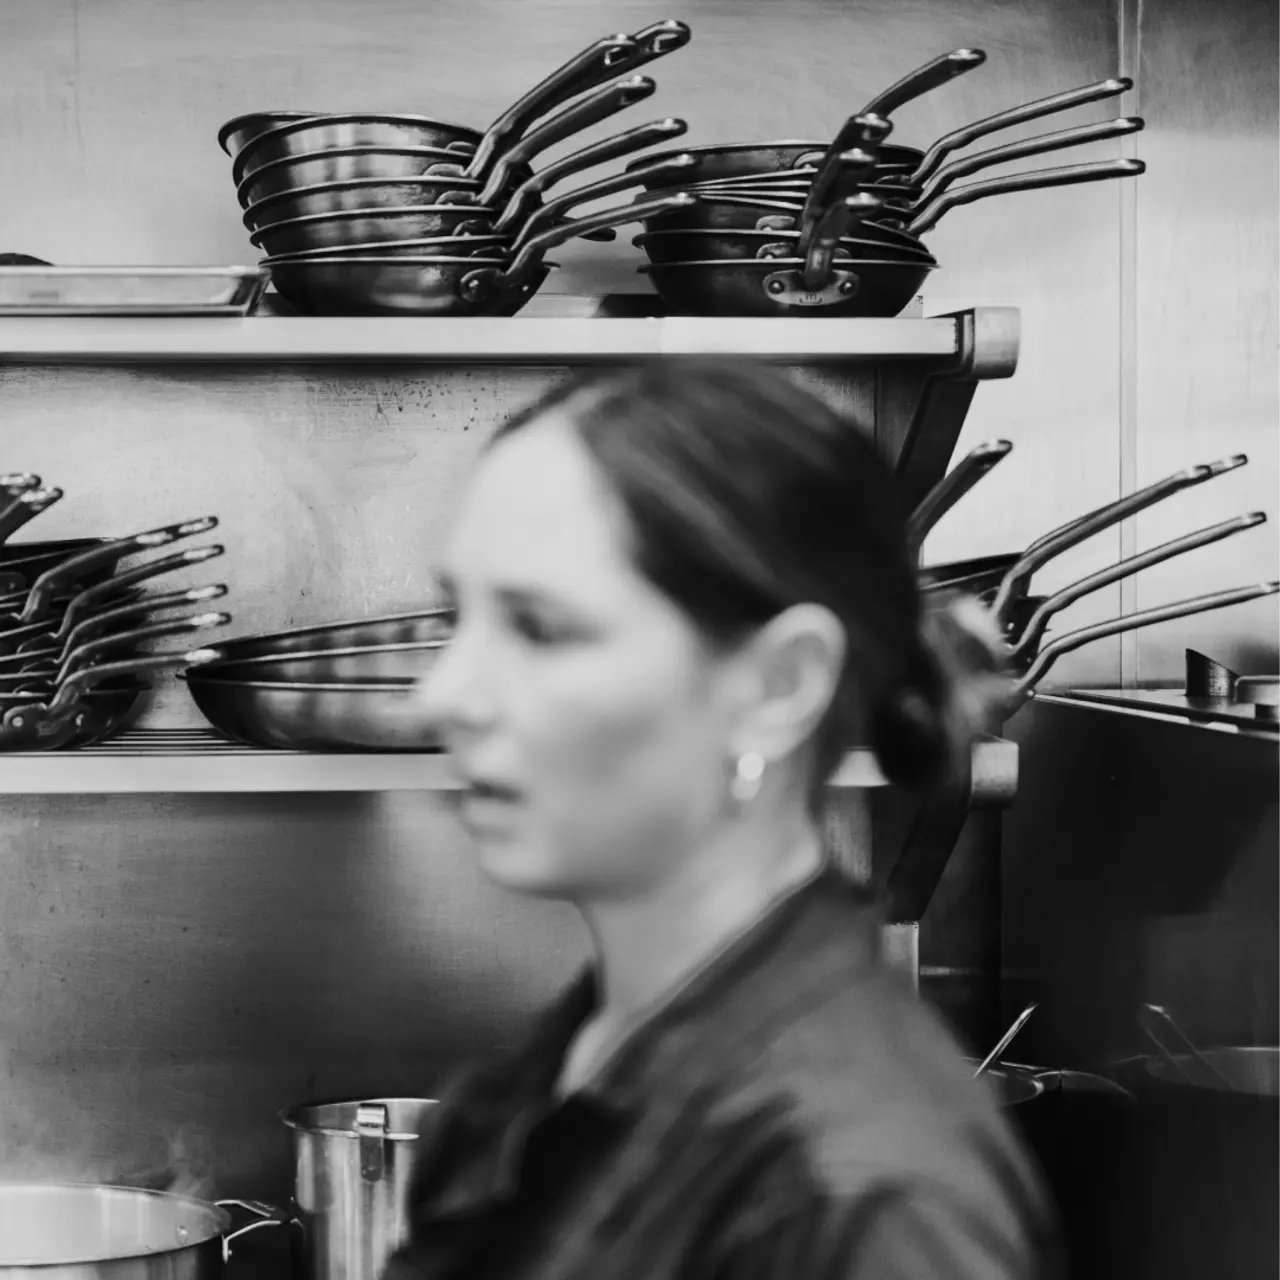 A woman stands in a kitchen with shelves of pans blurred in the background, emphasizing her motion or the hectic environment.